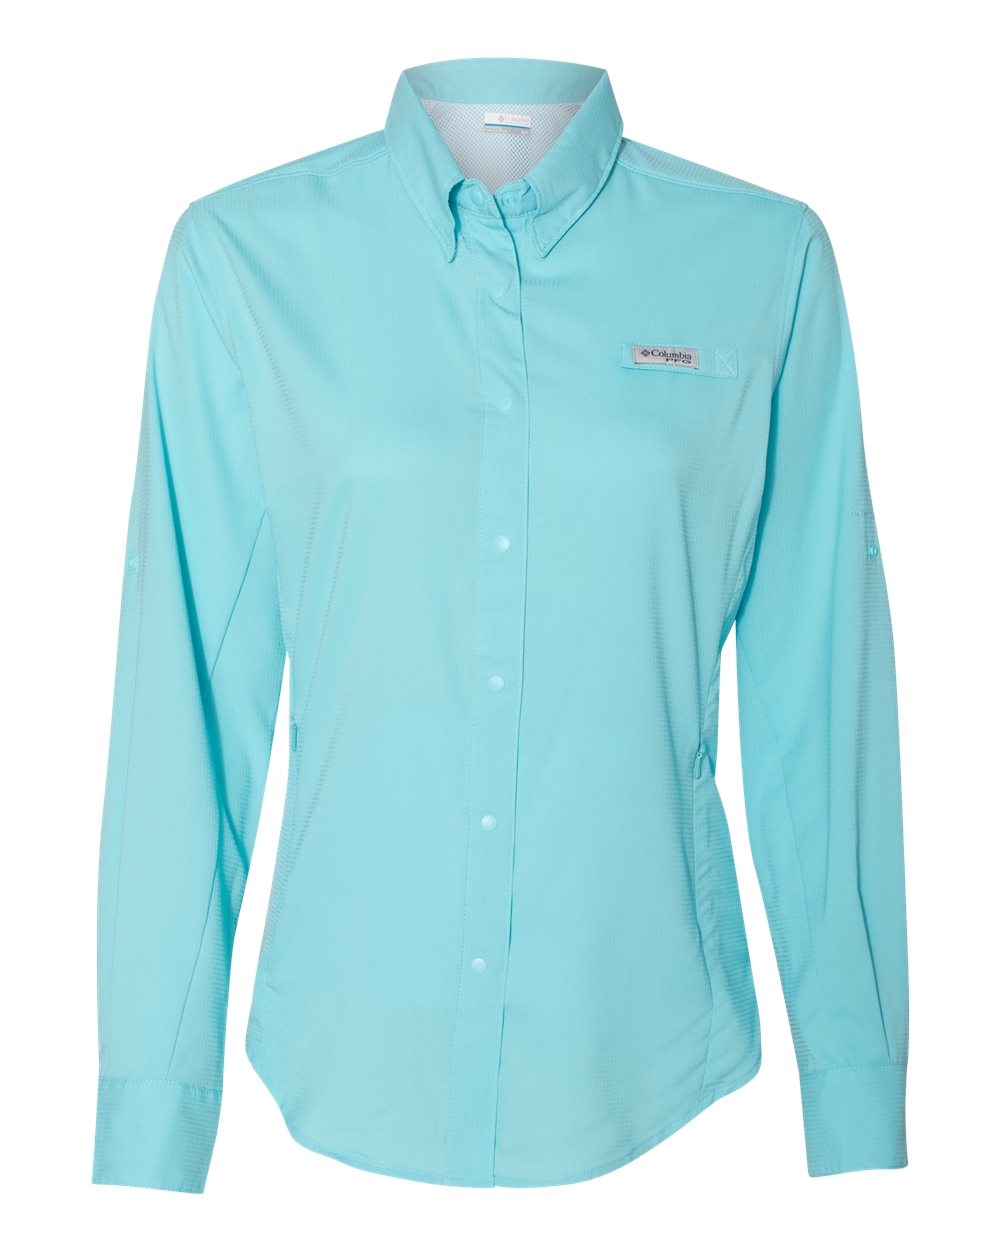 Columbia Men's PFG Tamiami™ II Short-Sleeve Fishing Shirts 128705. Free  shipping available. 30 Day Return Policy. Quantity Discounts.